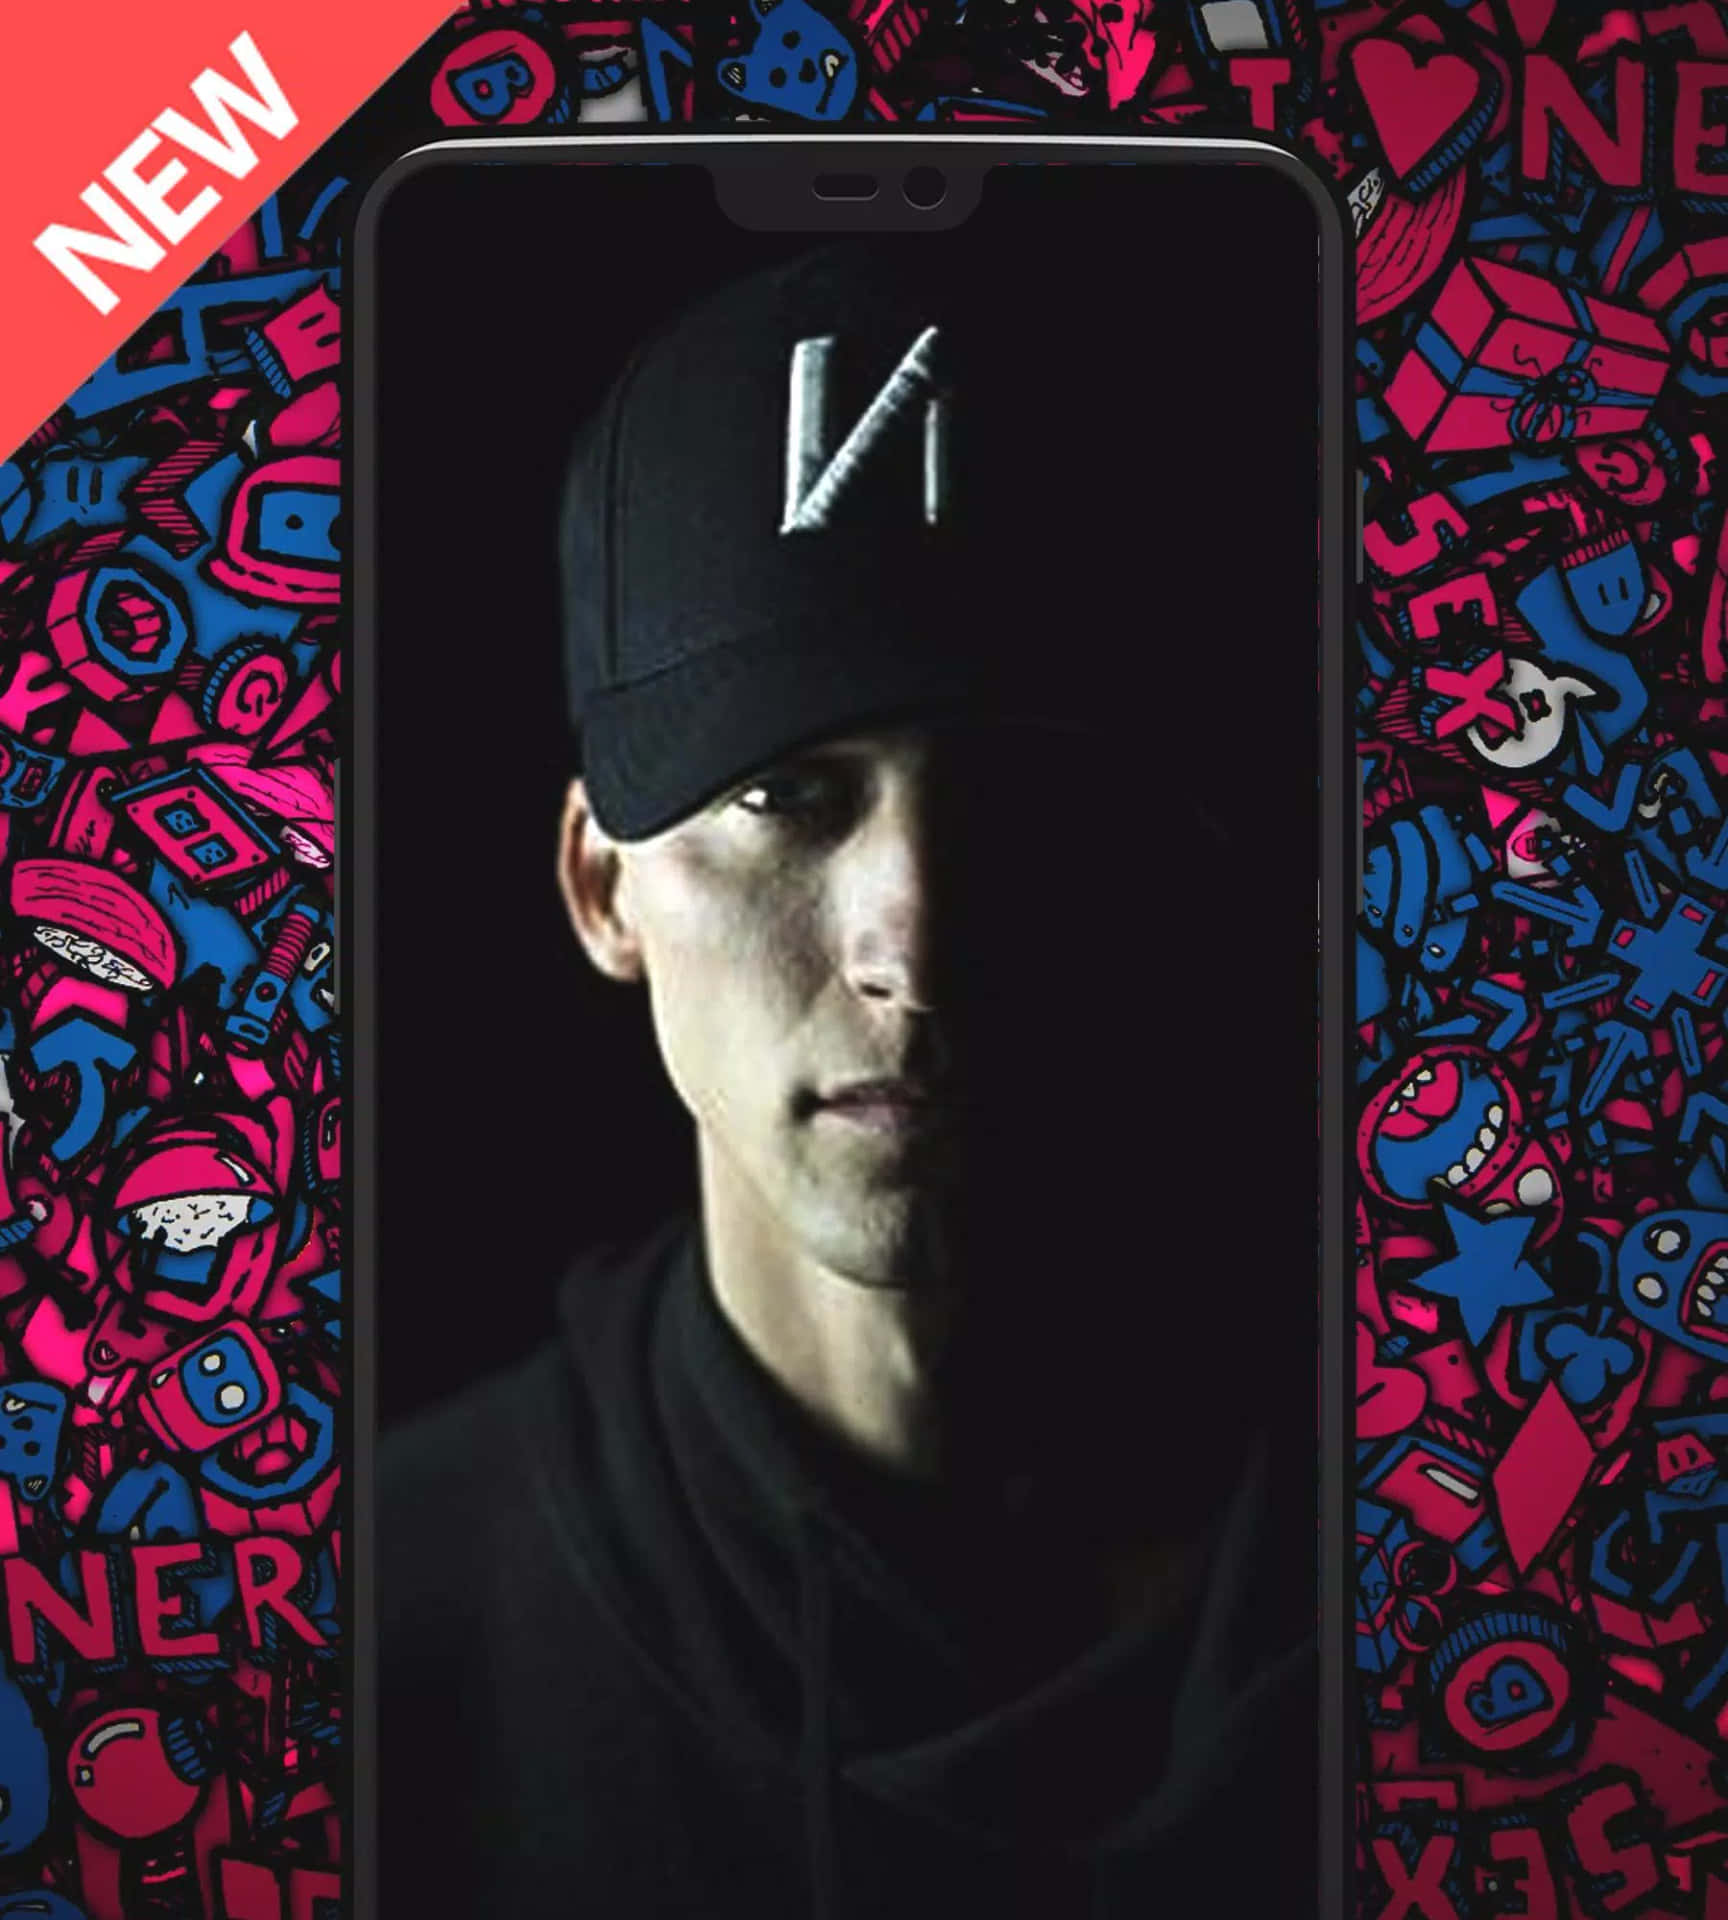 NF performing on stage Wallpaper